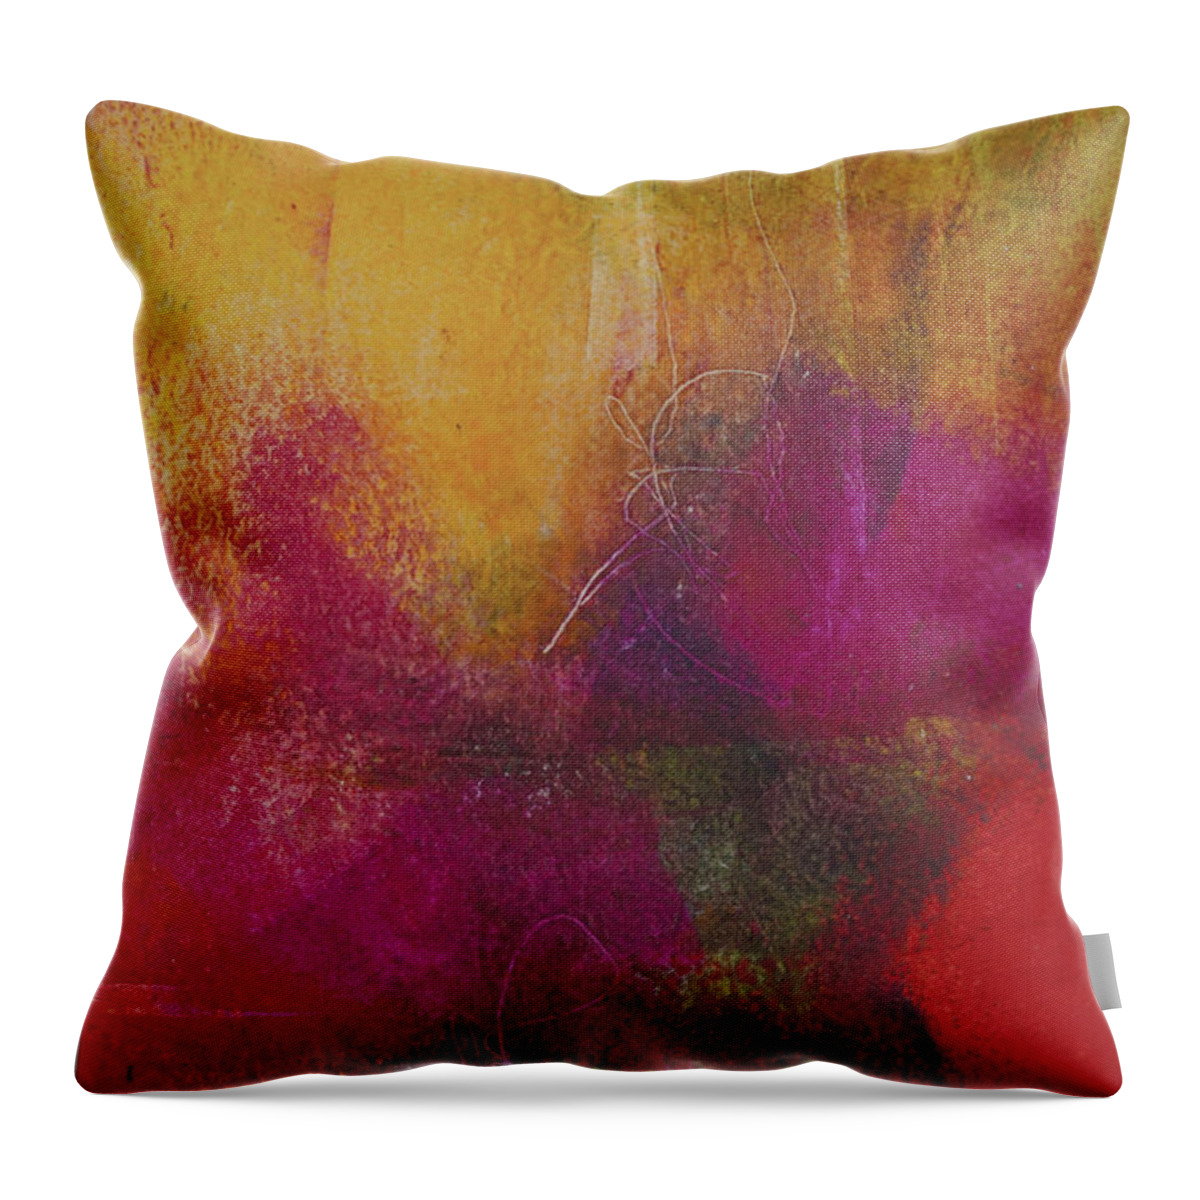 Oil Throw Pillow featuring the painting Oh So Pink by Christine Chin-Fook